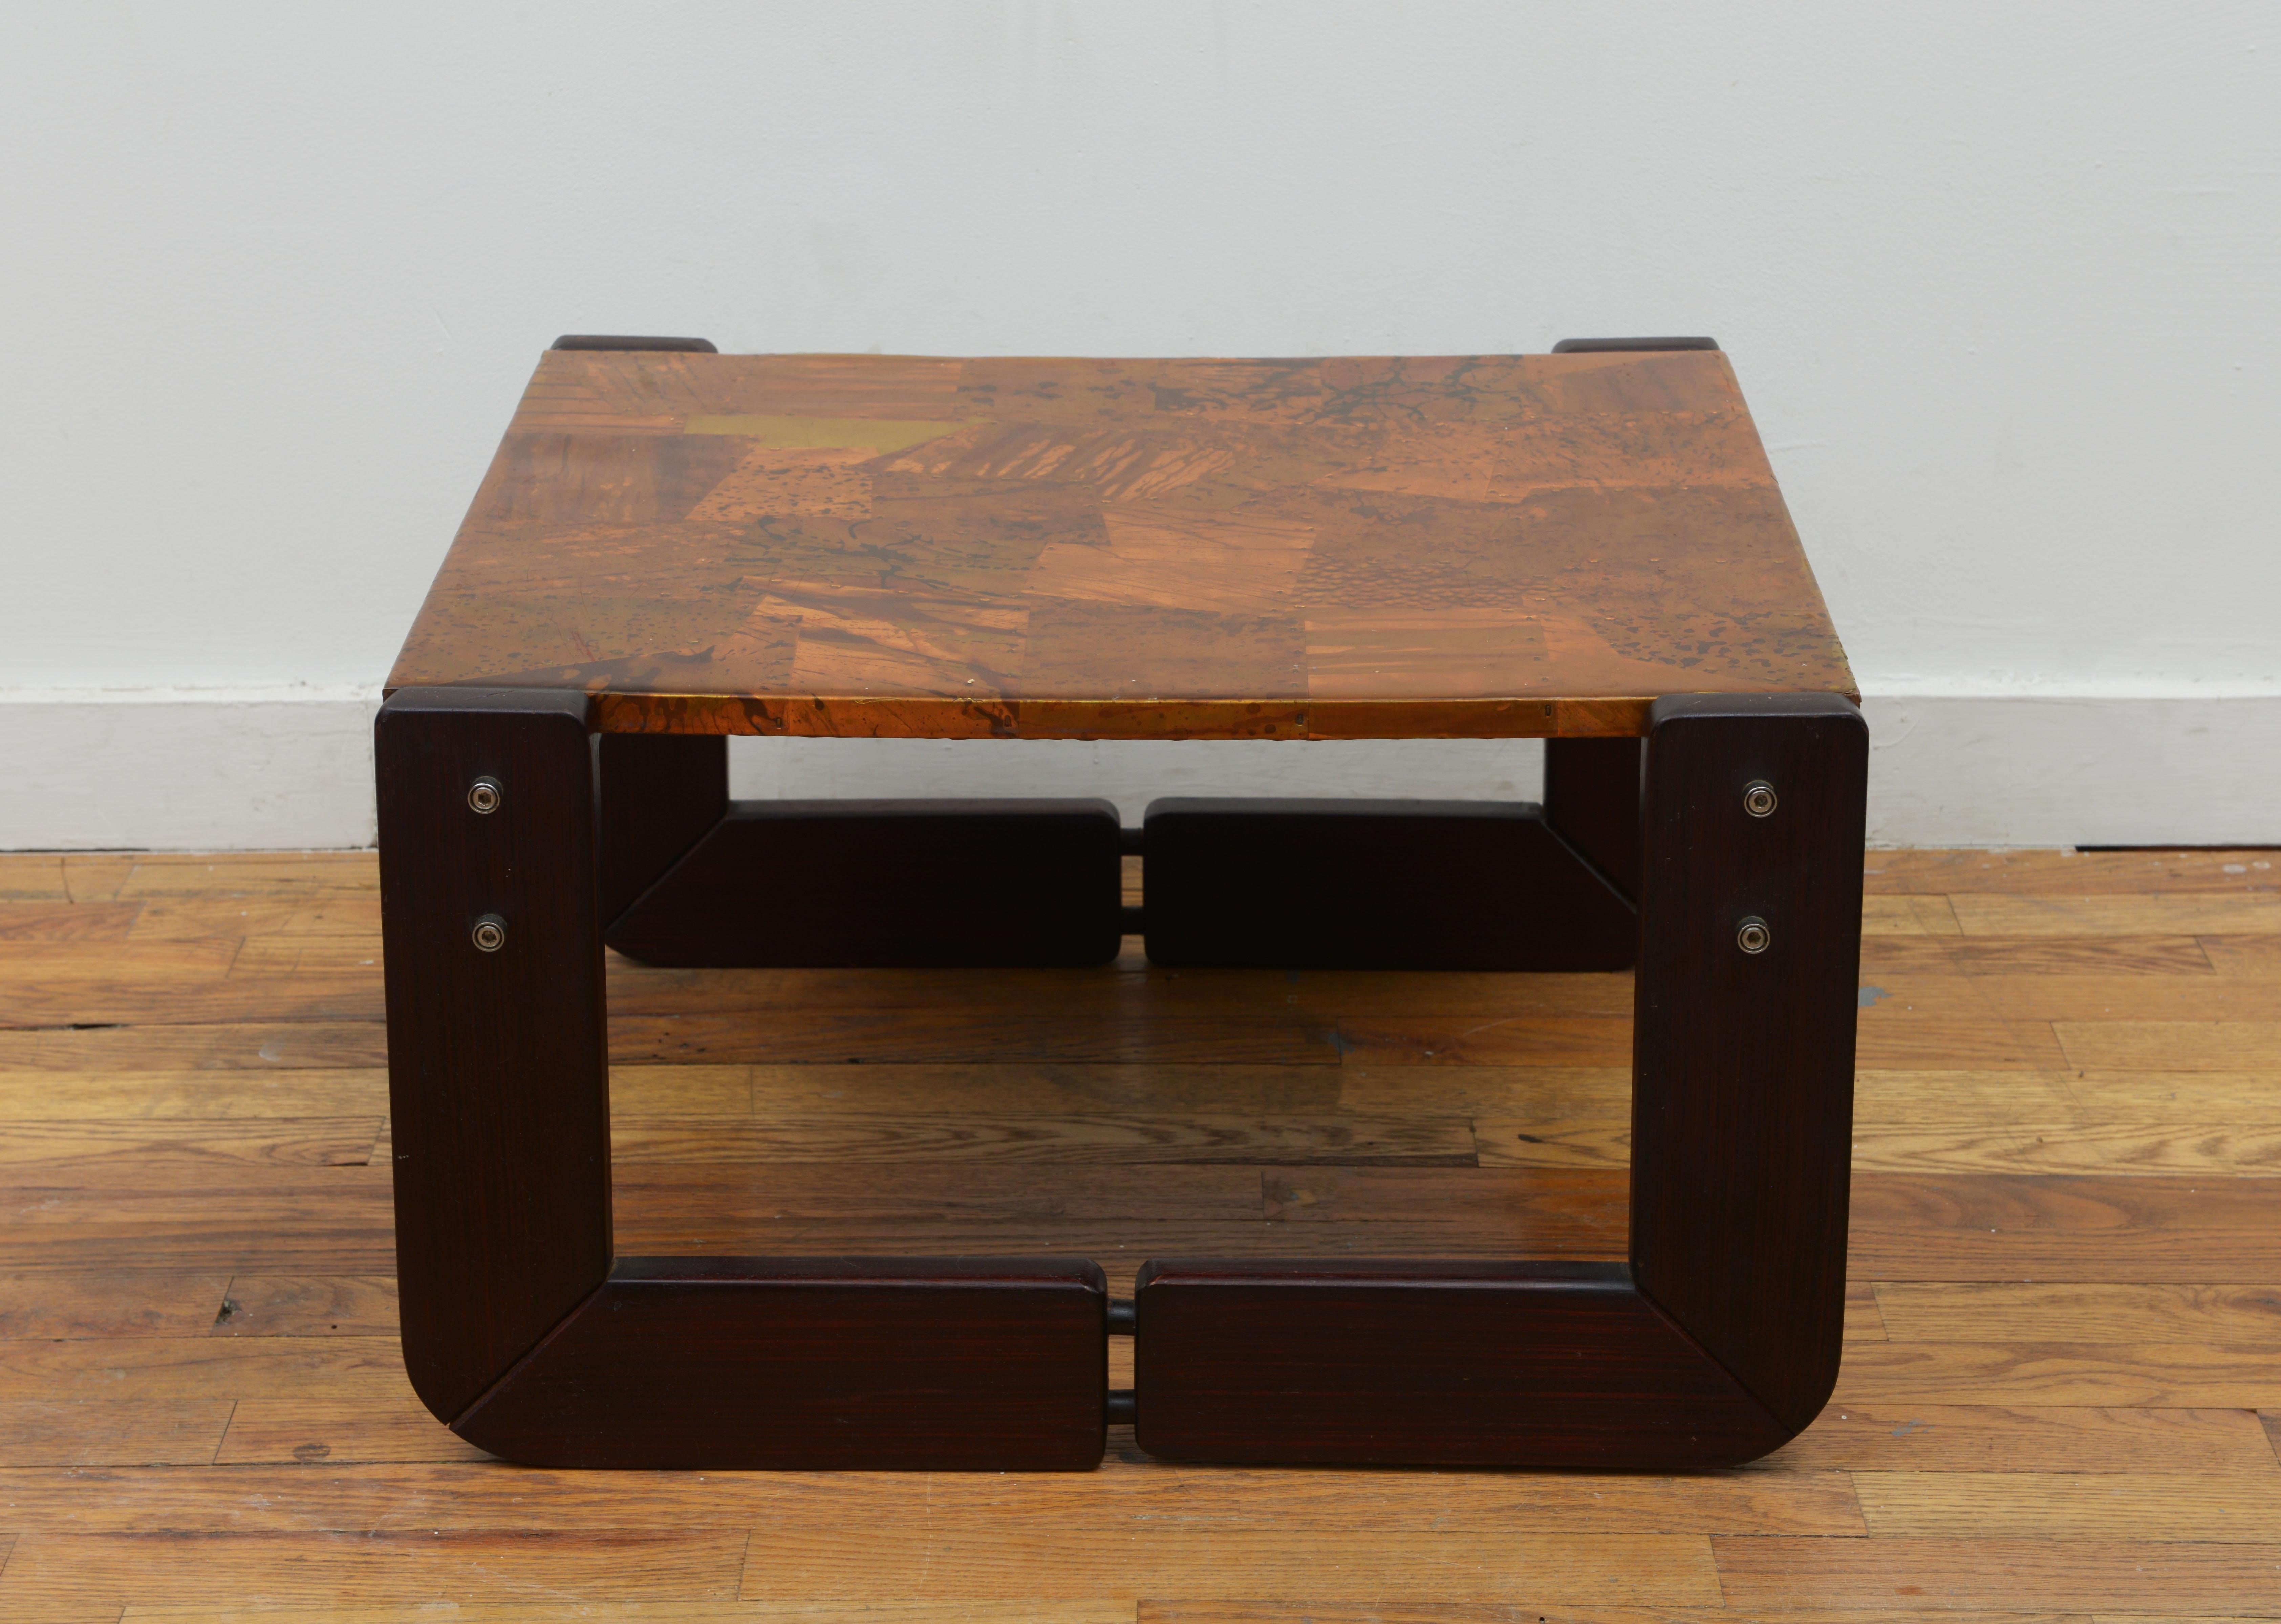 Metal Percival Lafer Copper Patchwork and Rosewood End Tables 1970s, 'Signed' For Sale